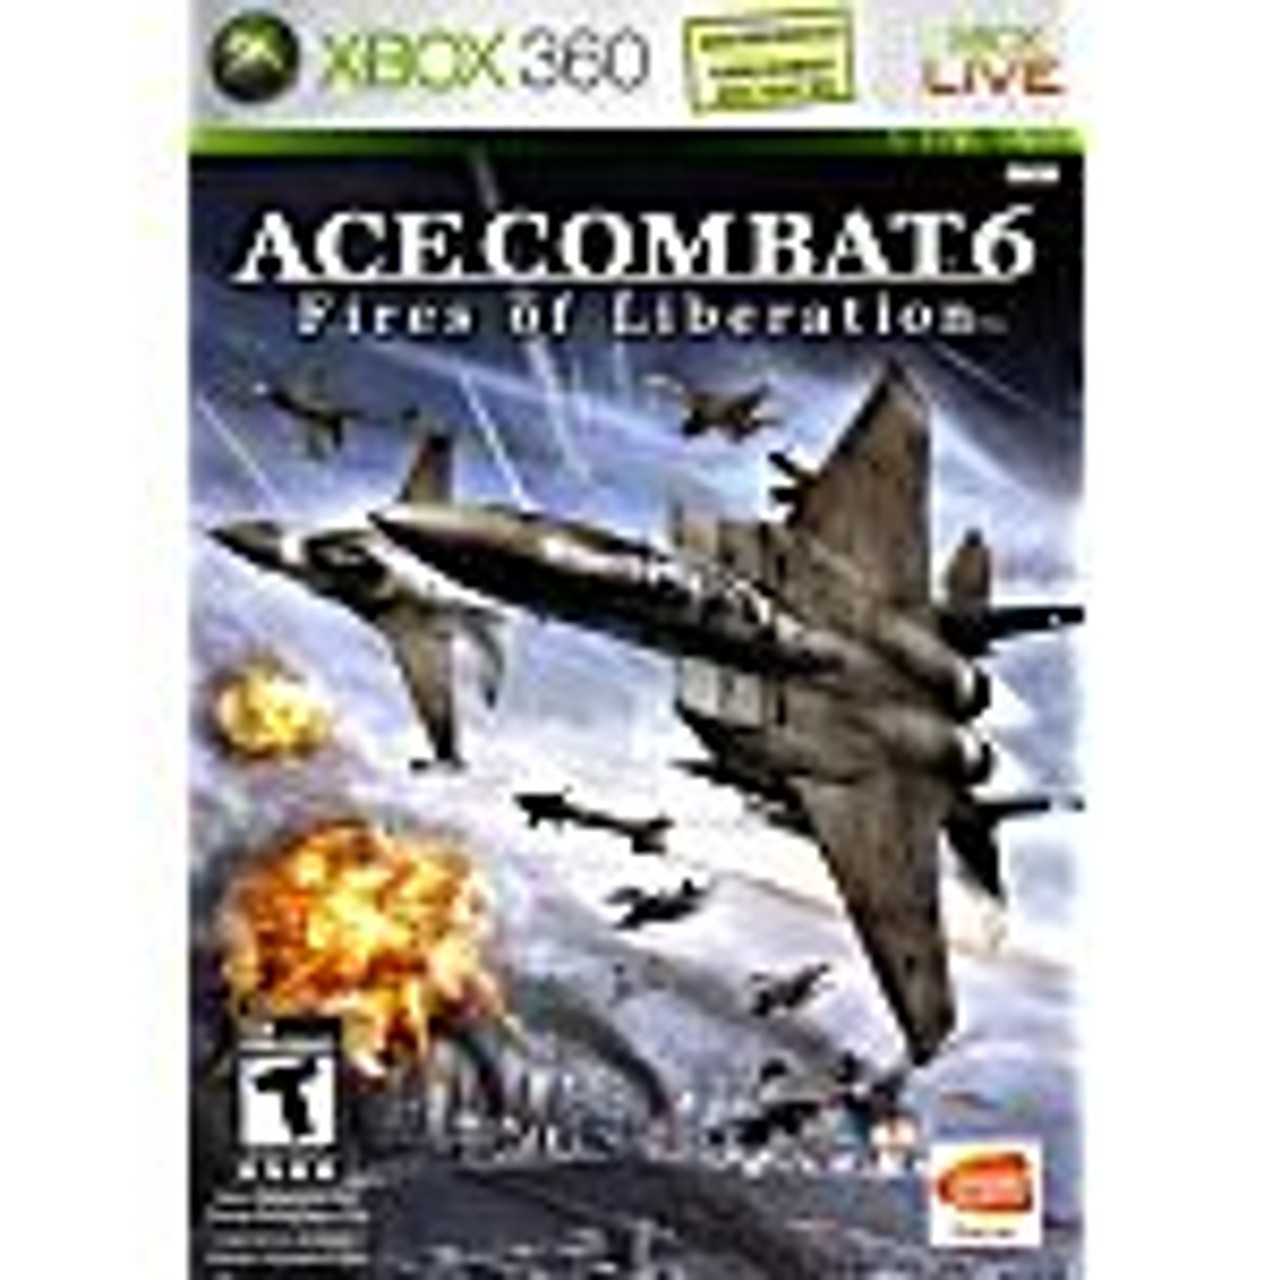 ACE COMBAT 6 FIRES OF LIBERATION  - XBOX 360